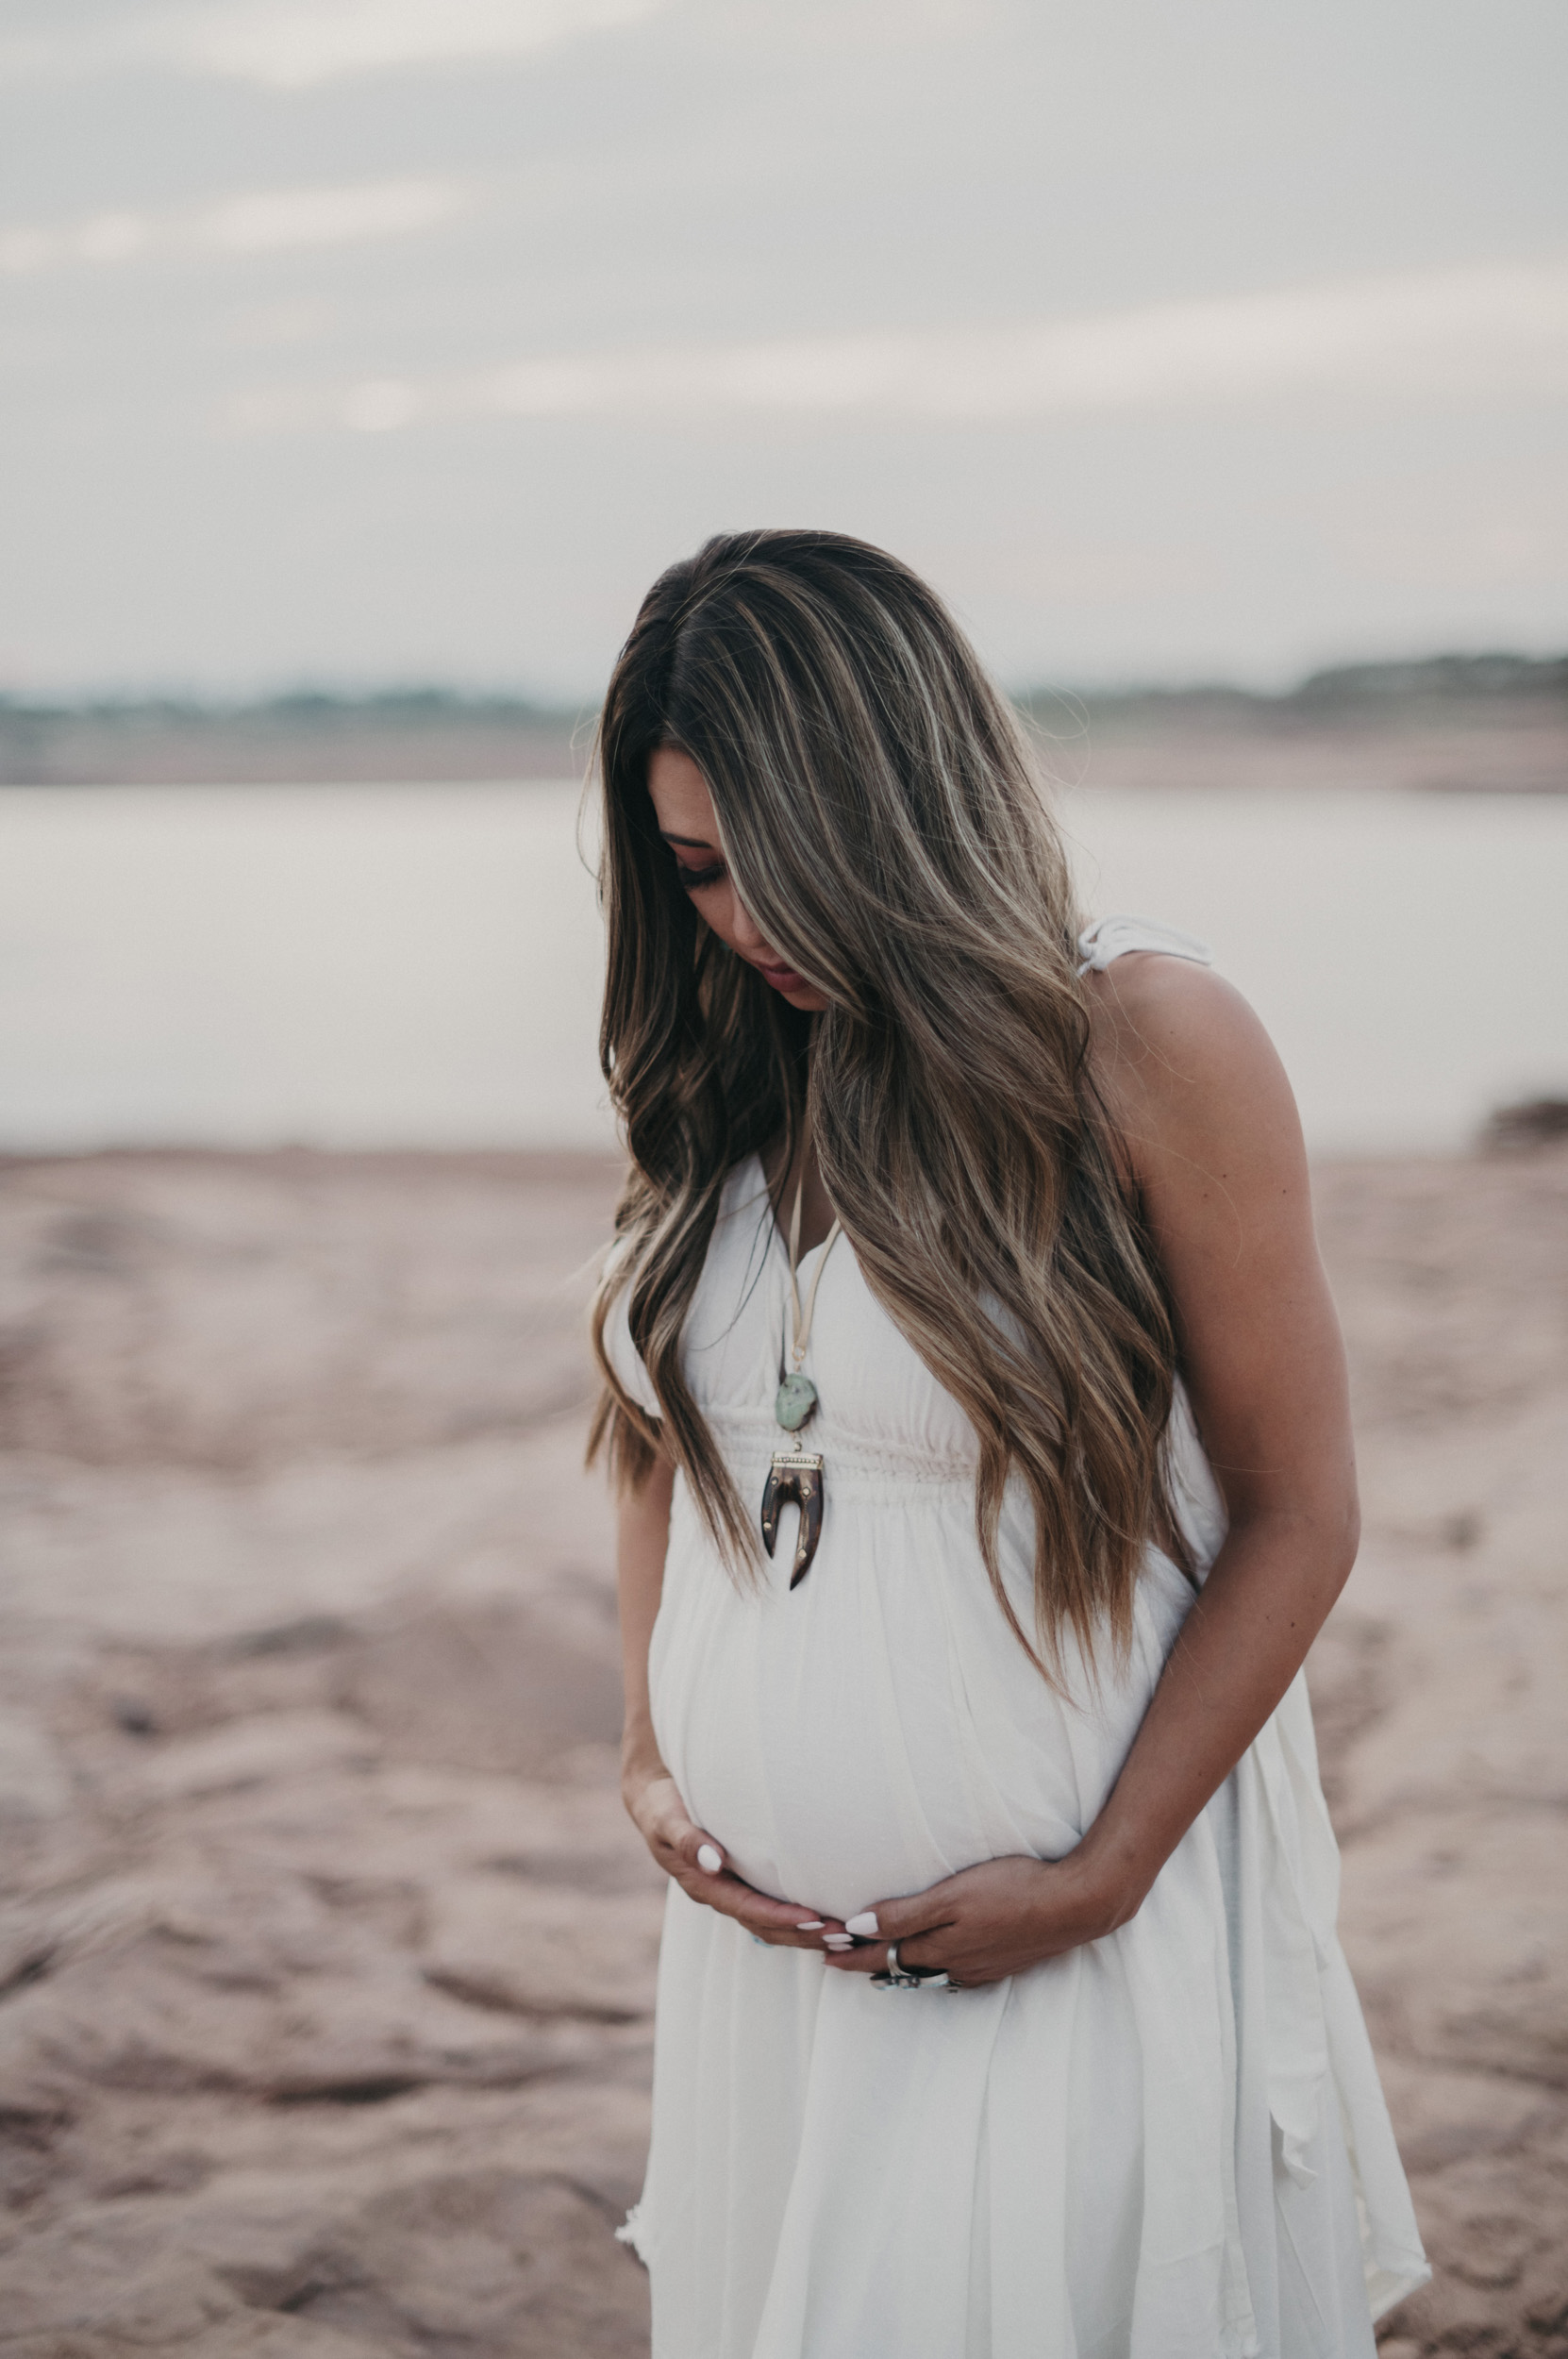 Pregnant woman in front of lake on rocks